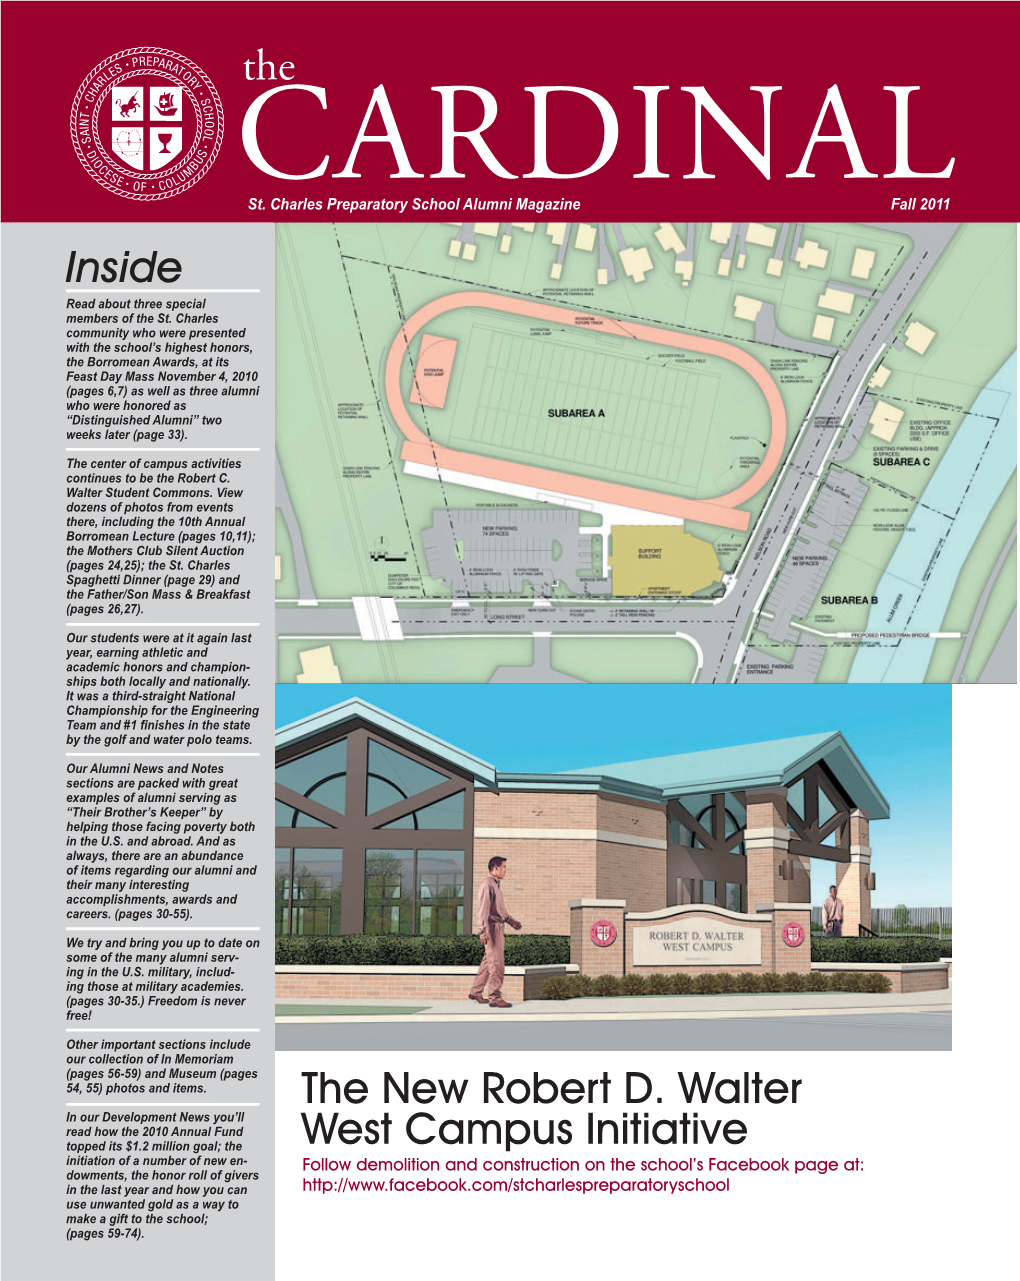 The the New Robert D. Walter West Campus Initiative Inside